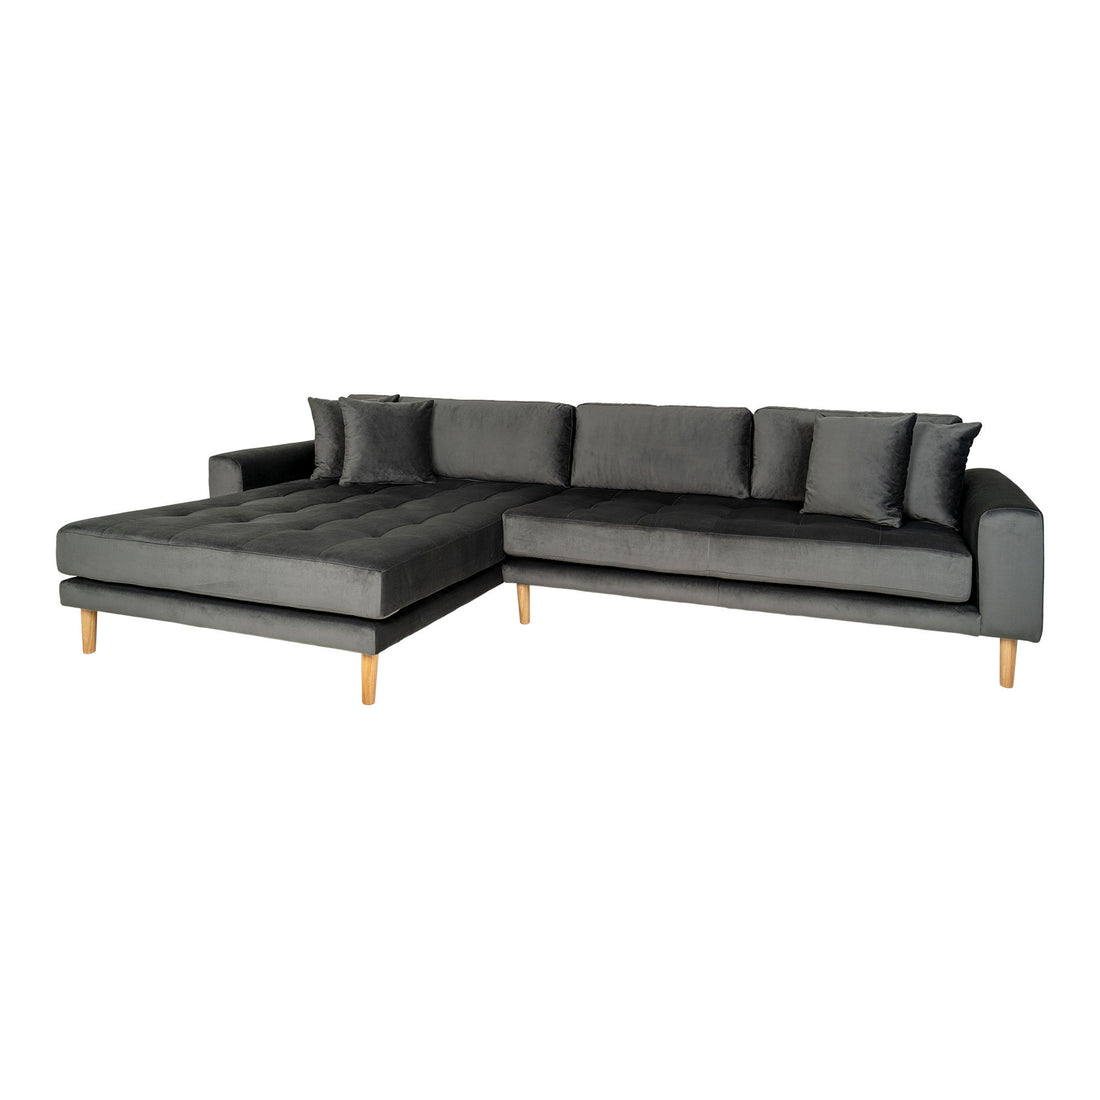 Lido Lounge Sofa - Lounge Sofa, left -wing in velor, dark gray with four pillows and nature wooden legs, HN1013 - 1 - pcs